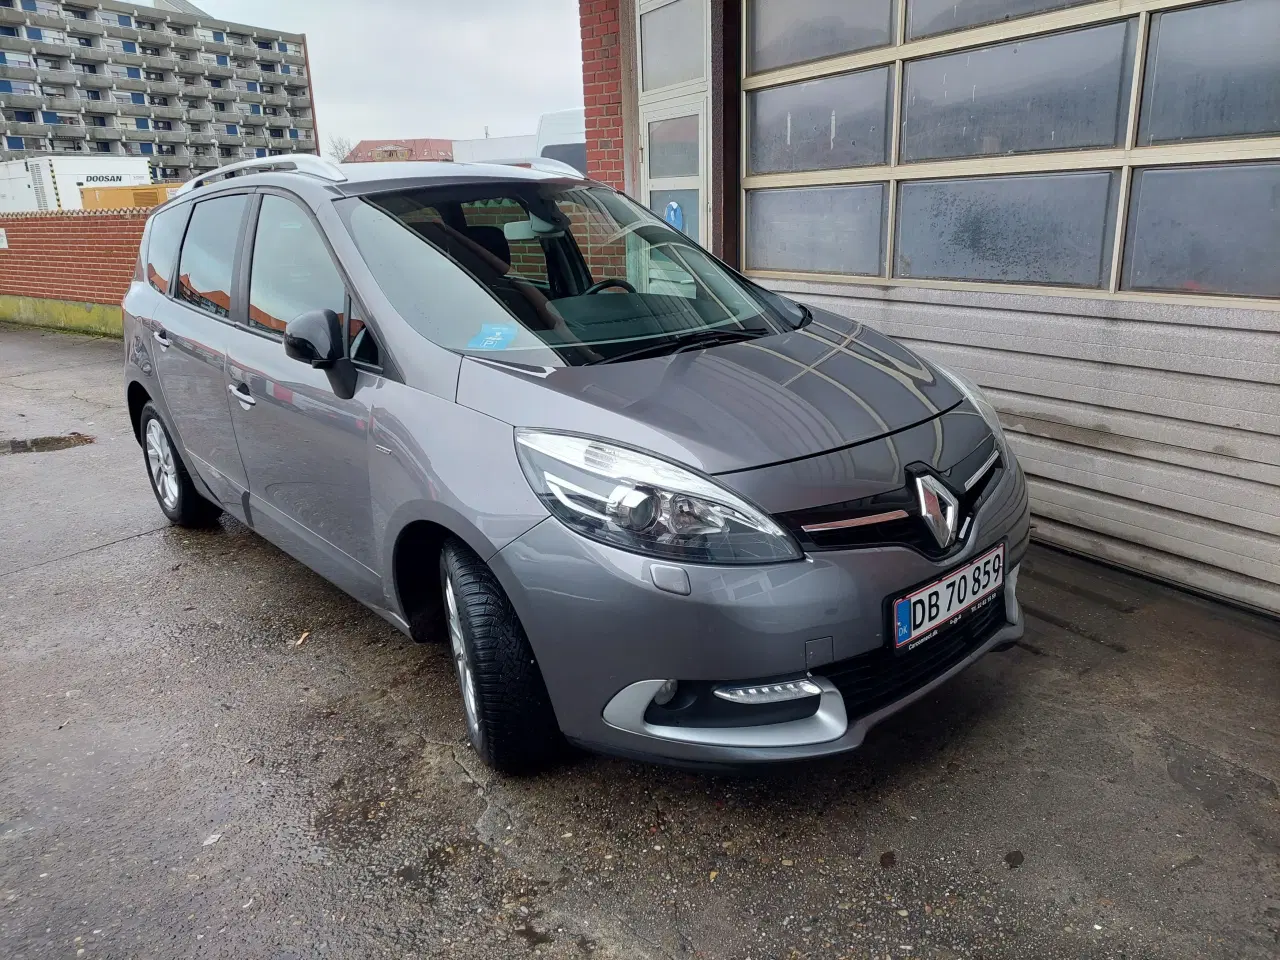 Billede 1 - Renault grand scenic 7 pers limited edition 2015